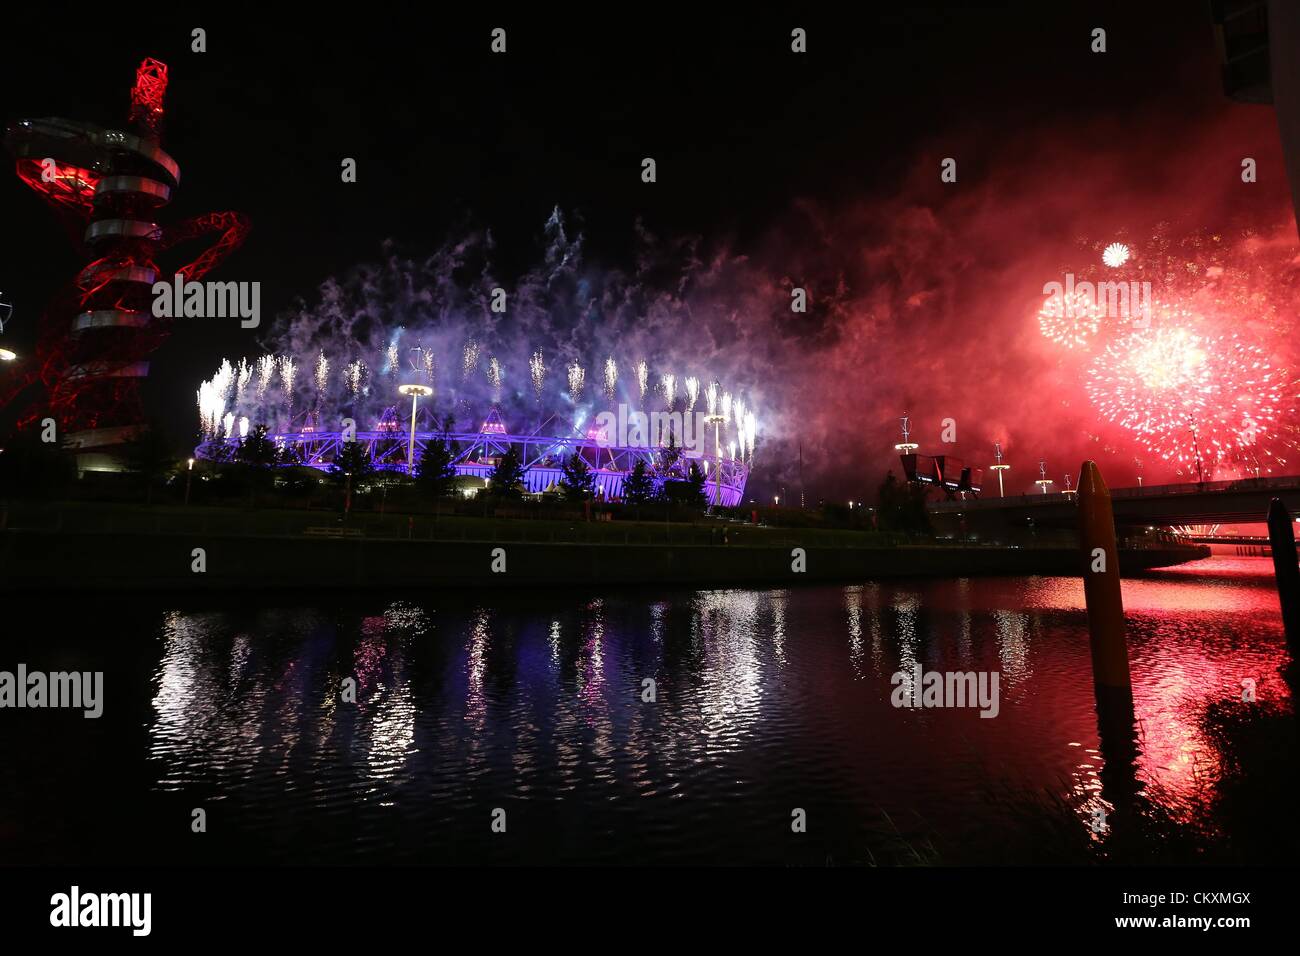 London UK. 29th Aug 2012. Opening Ceremony for the 2012 London Summer Paralympics at Olympic Park - Olympic Stadium during the London 2012 Paralympic Games in London, UK.  (Photo by Akihiro Sugimoto/AFLO SPORT/Alamy Live News)  Stock Photo